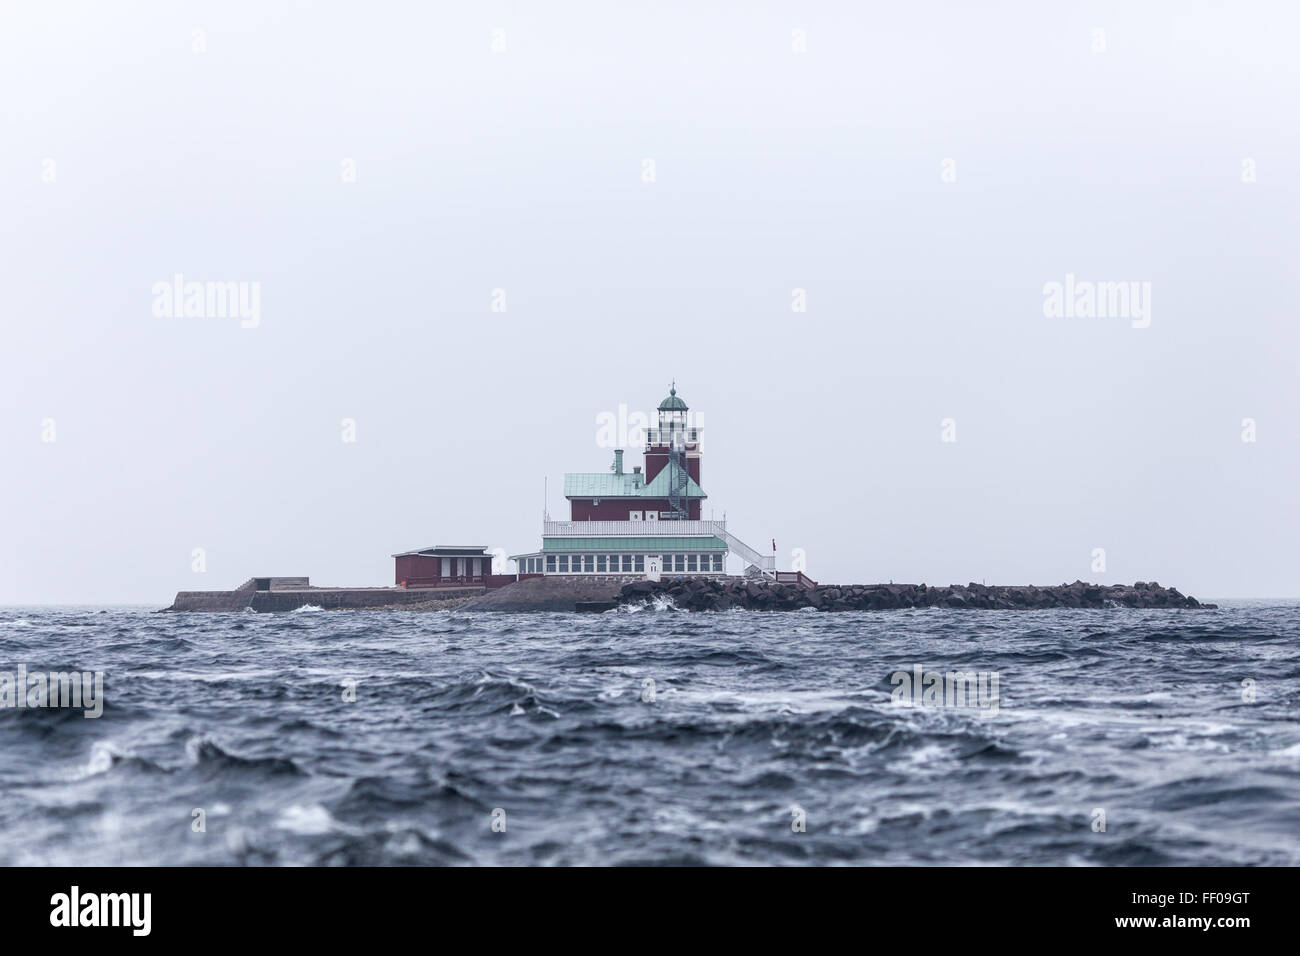 Island Lighthouse Island Lighthouse Banque D'Images